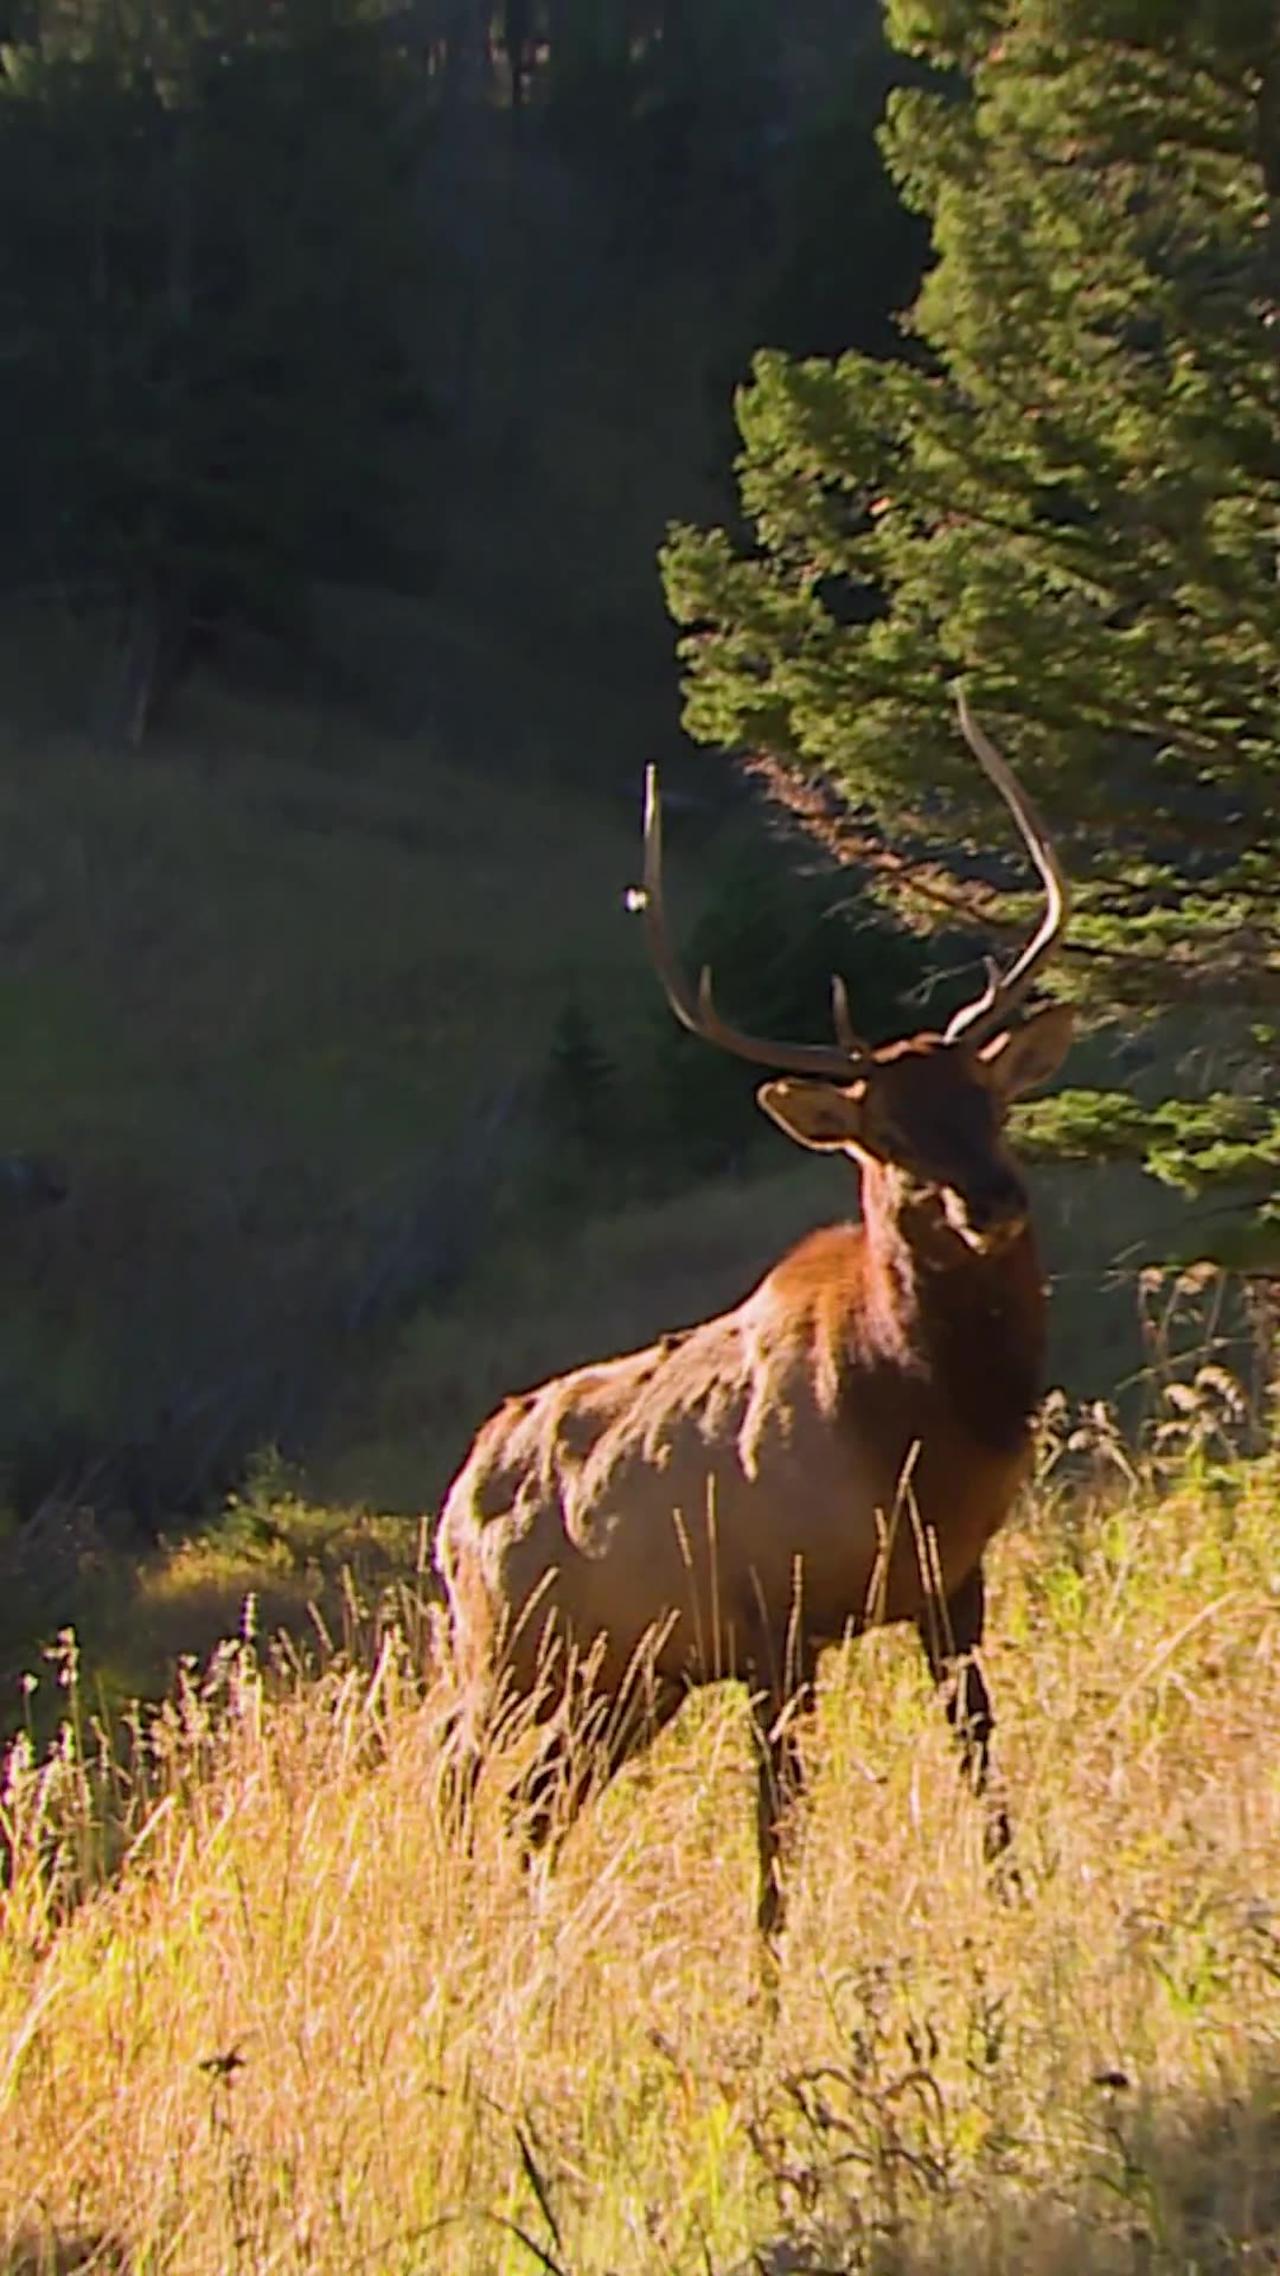 Have you ever been this close to a bugle before? What has been your closest encounter with elk?